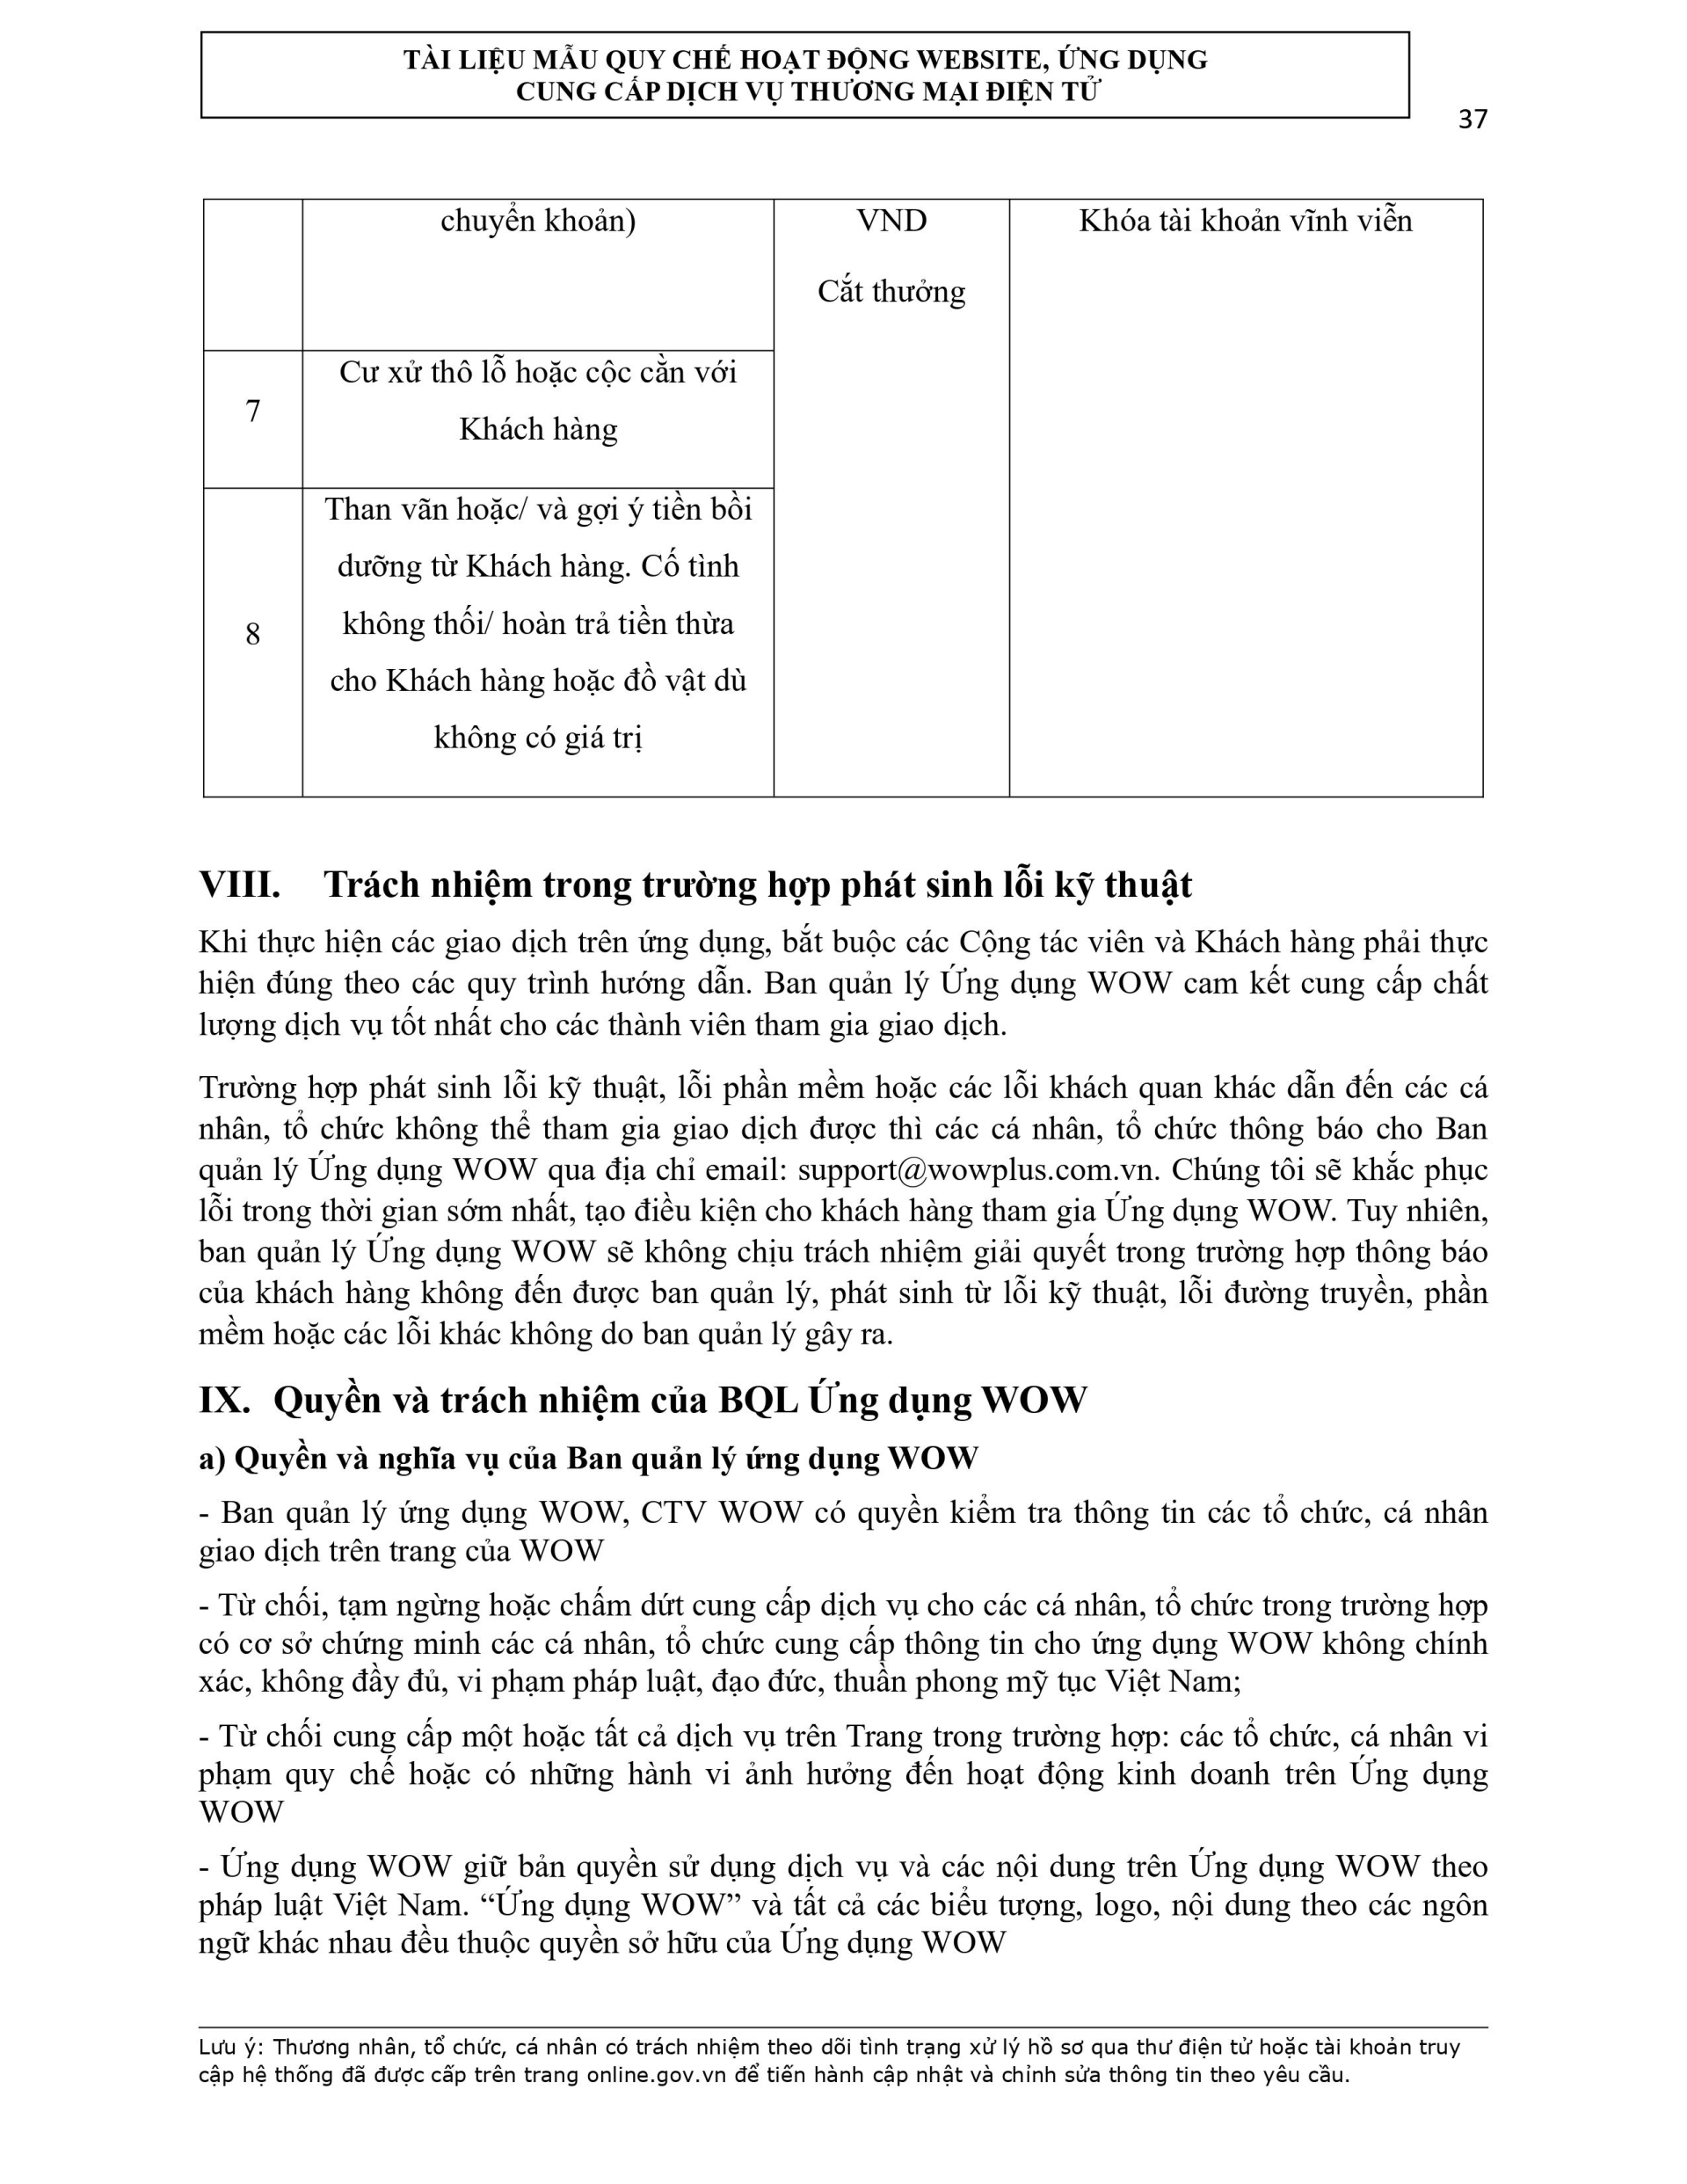 quy-che-hoat-dong-ung-dung-wow-page-0037